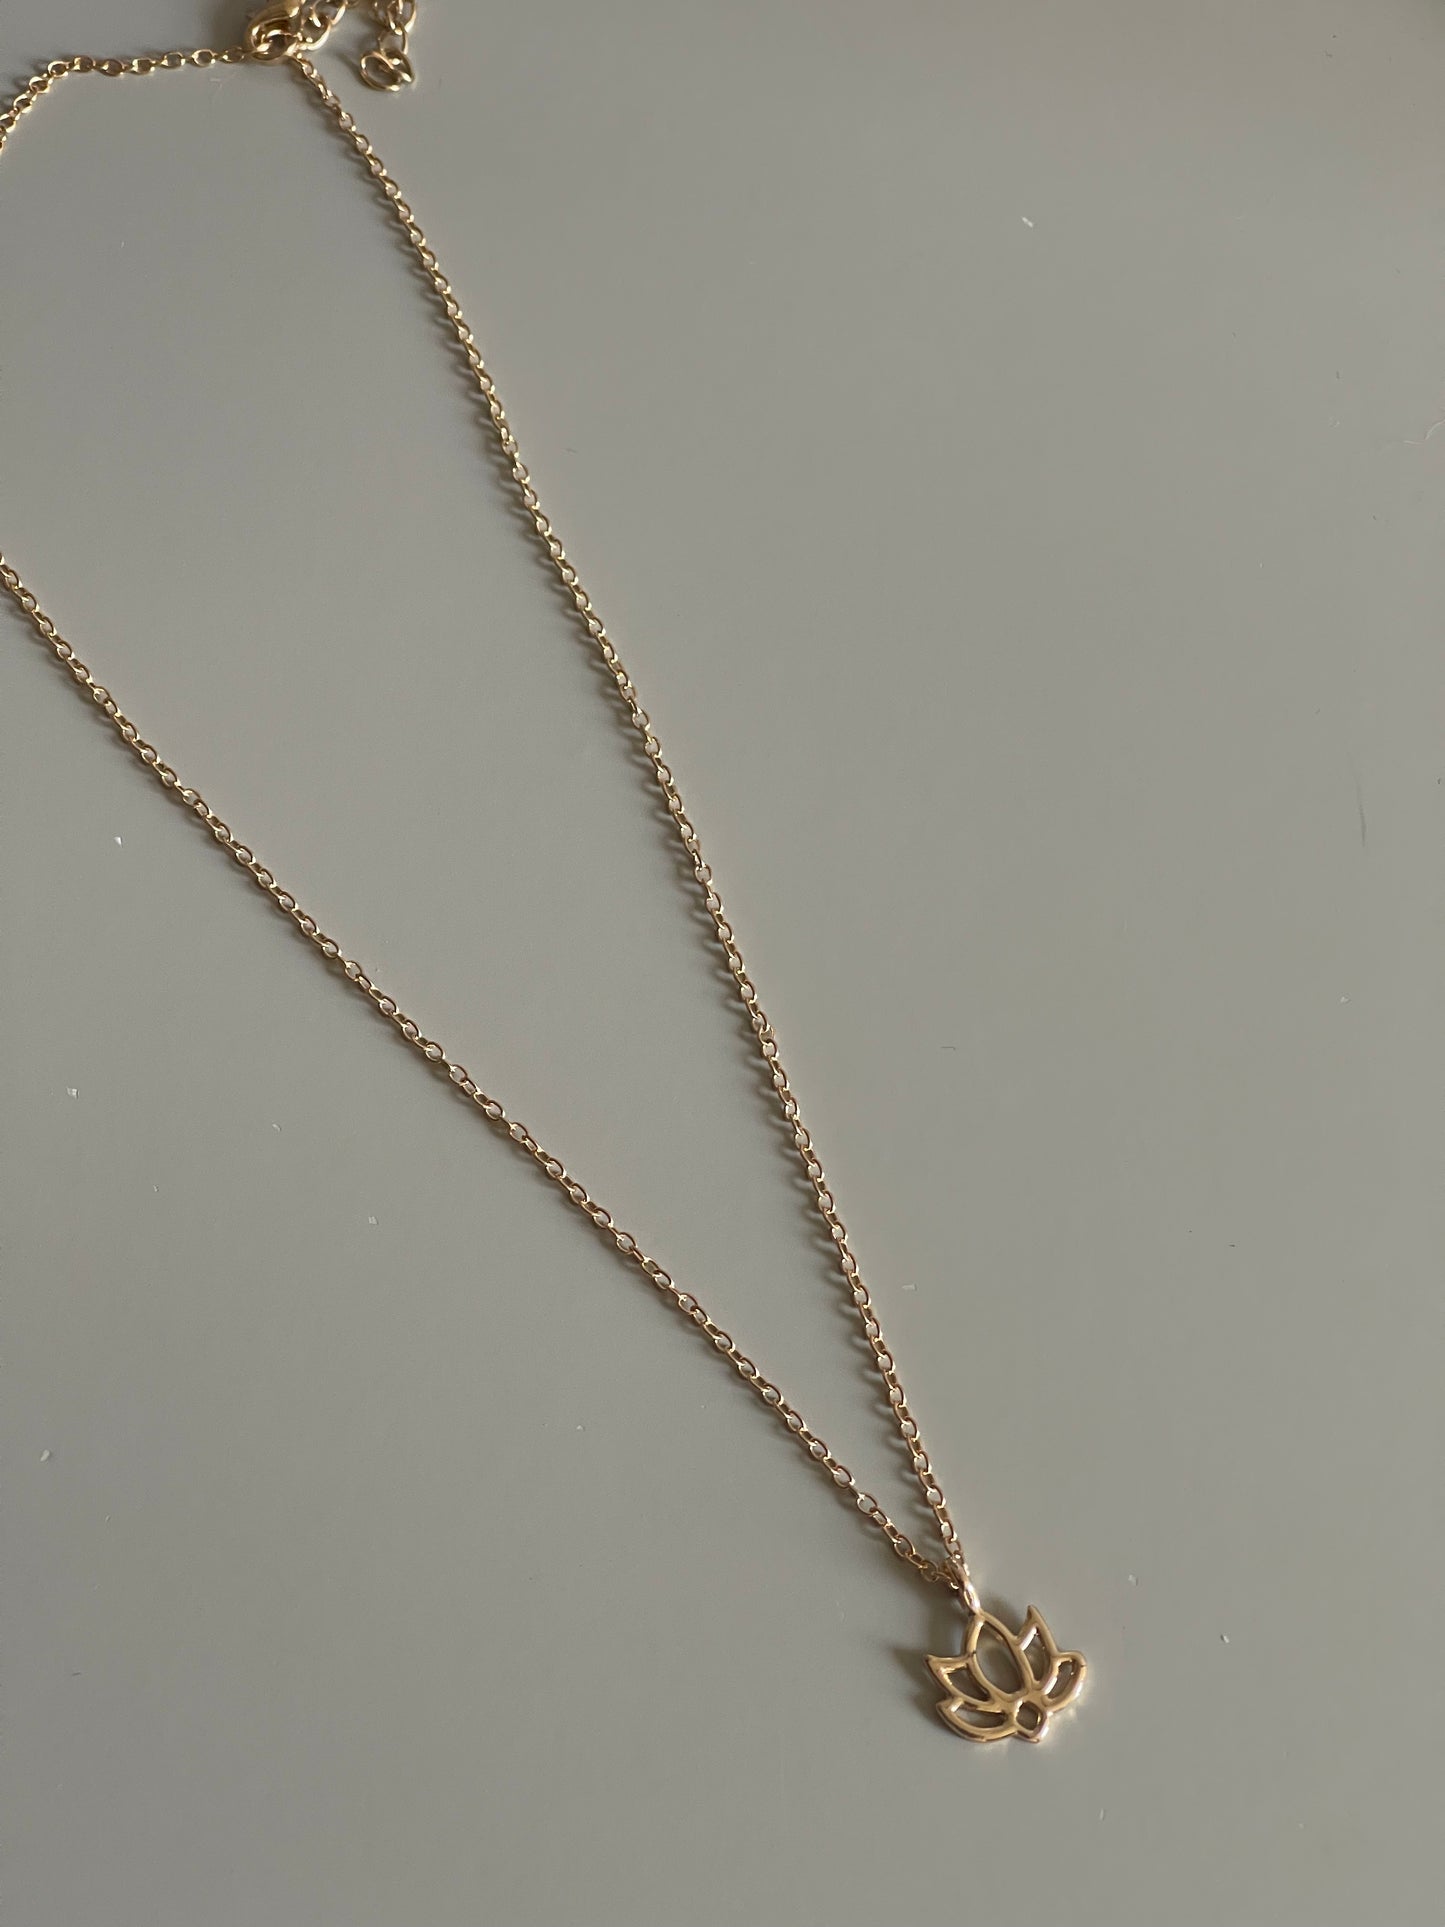 Lotus Flower Charm Necklace In Gold